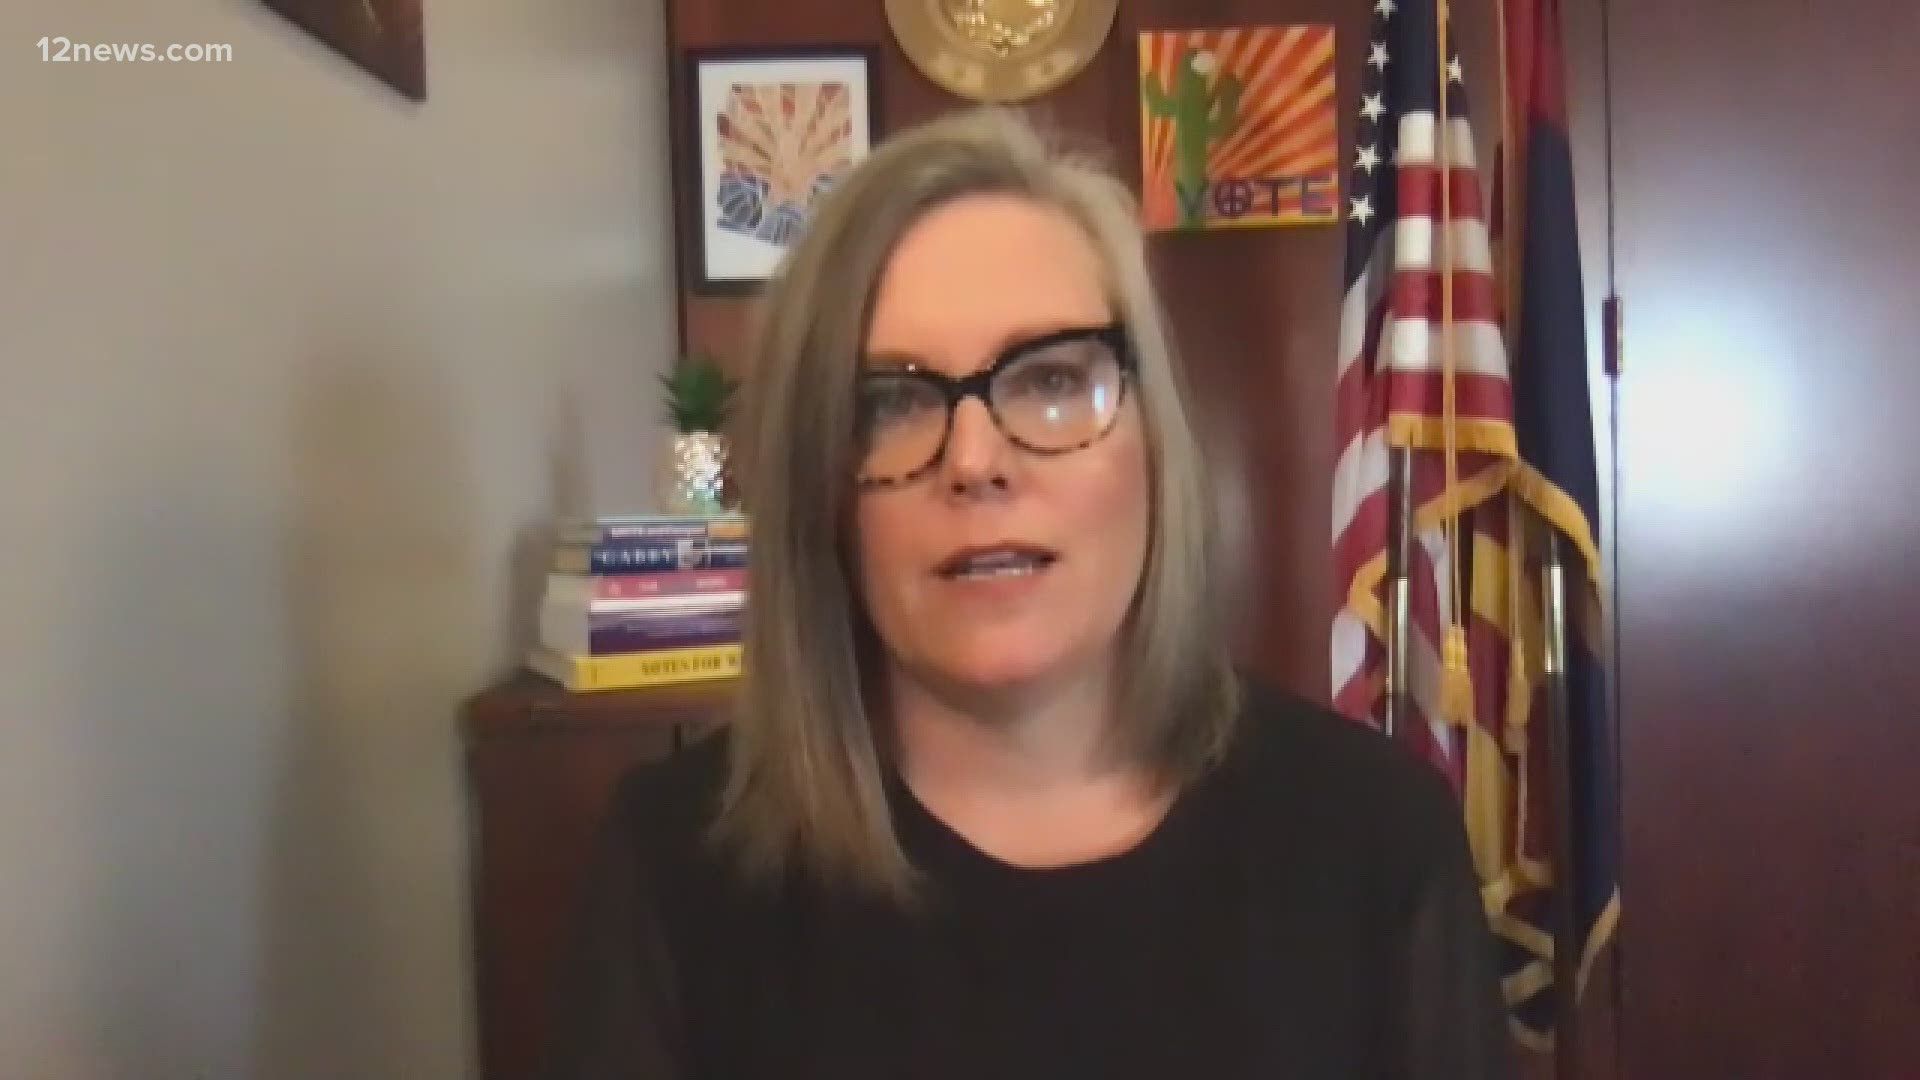 Arizona's Secretary of State Katie Hobbs has been subjected to threatening calls to her son, protesters at her door and calls for her husband to resign from his job.